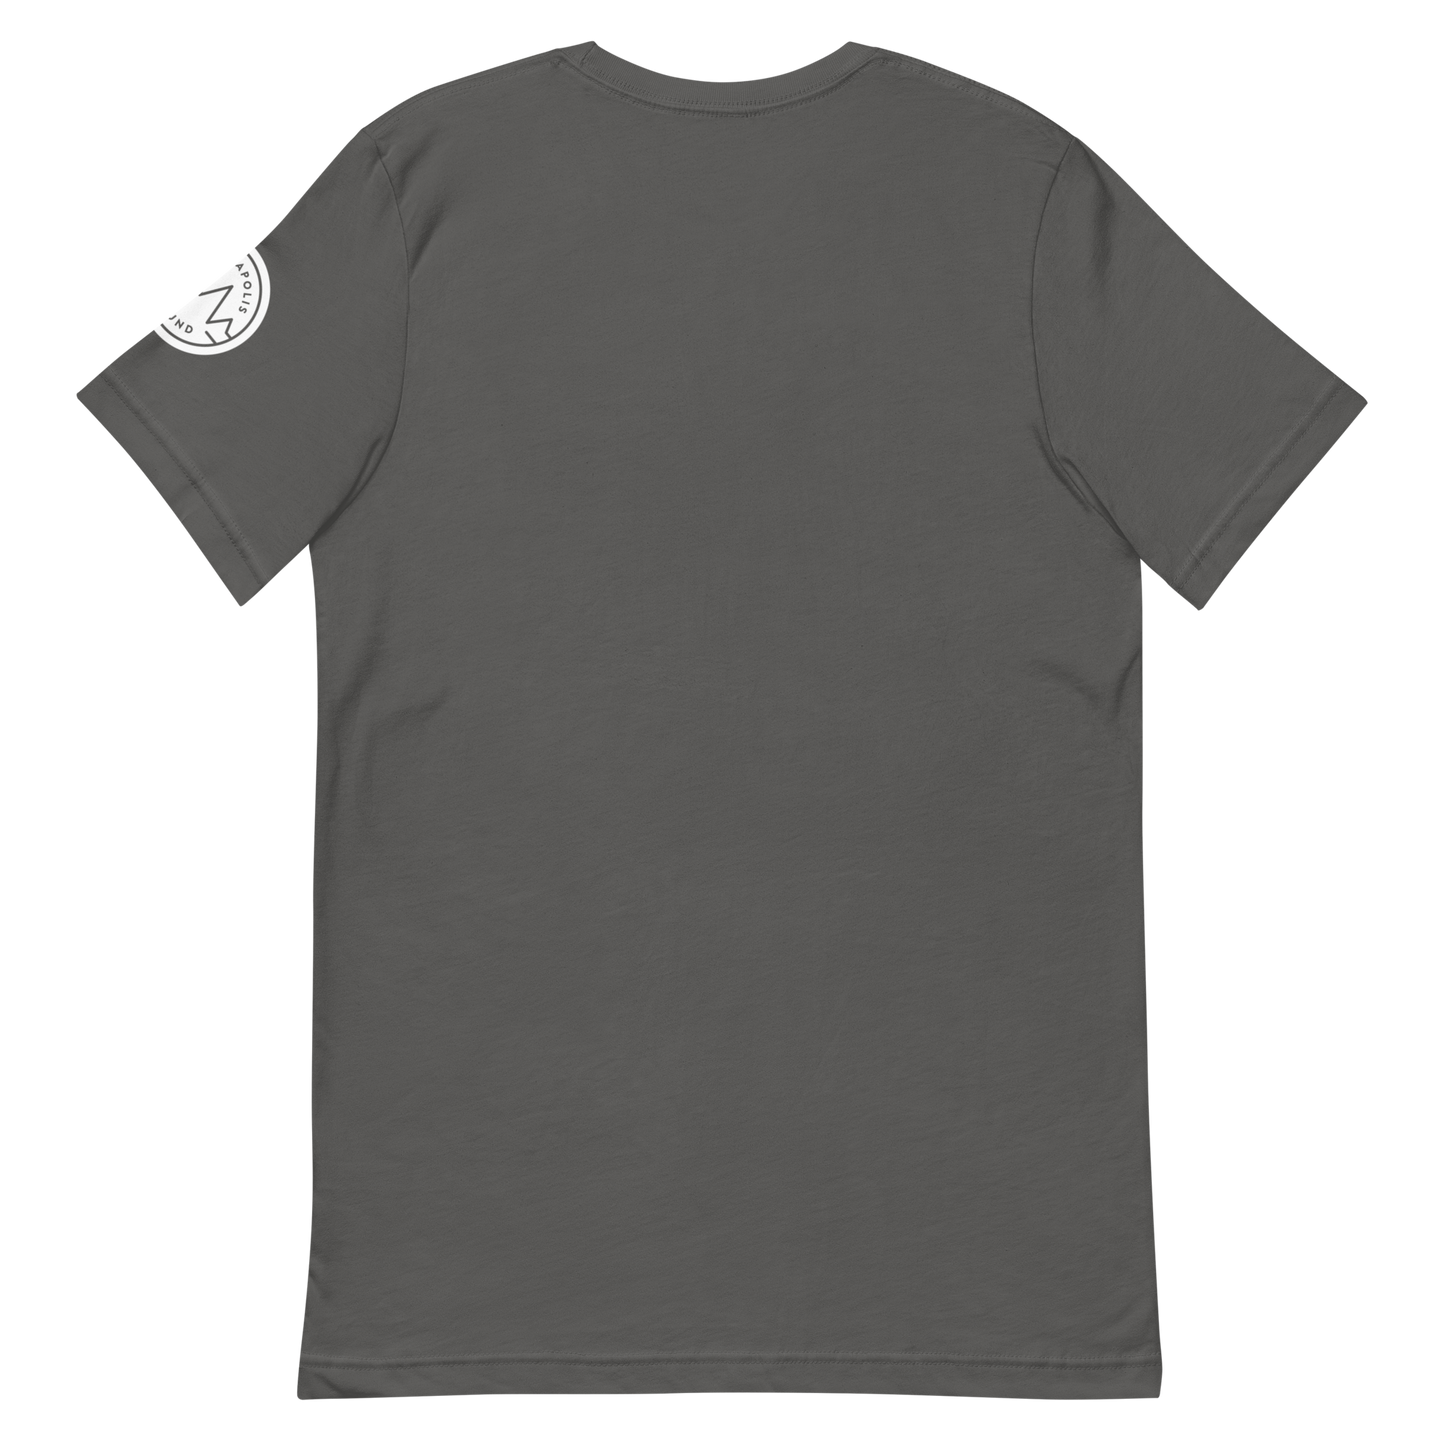 First Avenue North T-Shirt